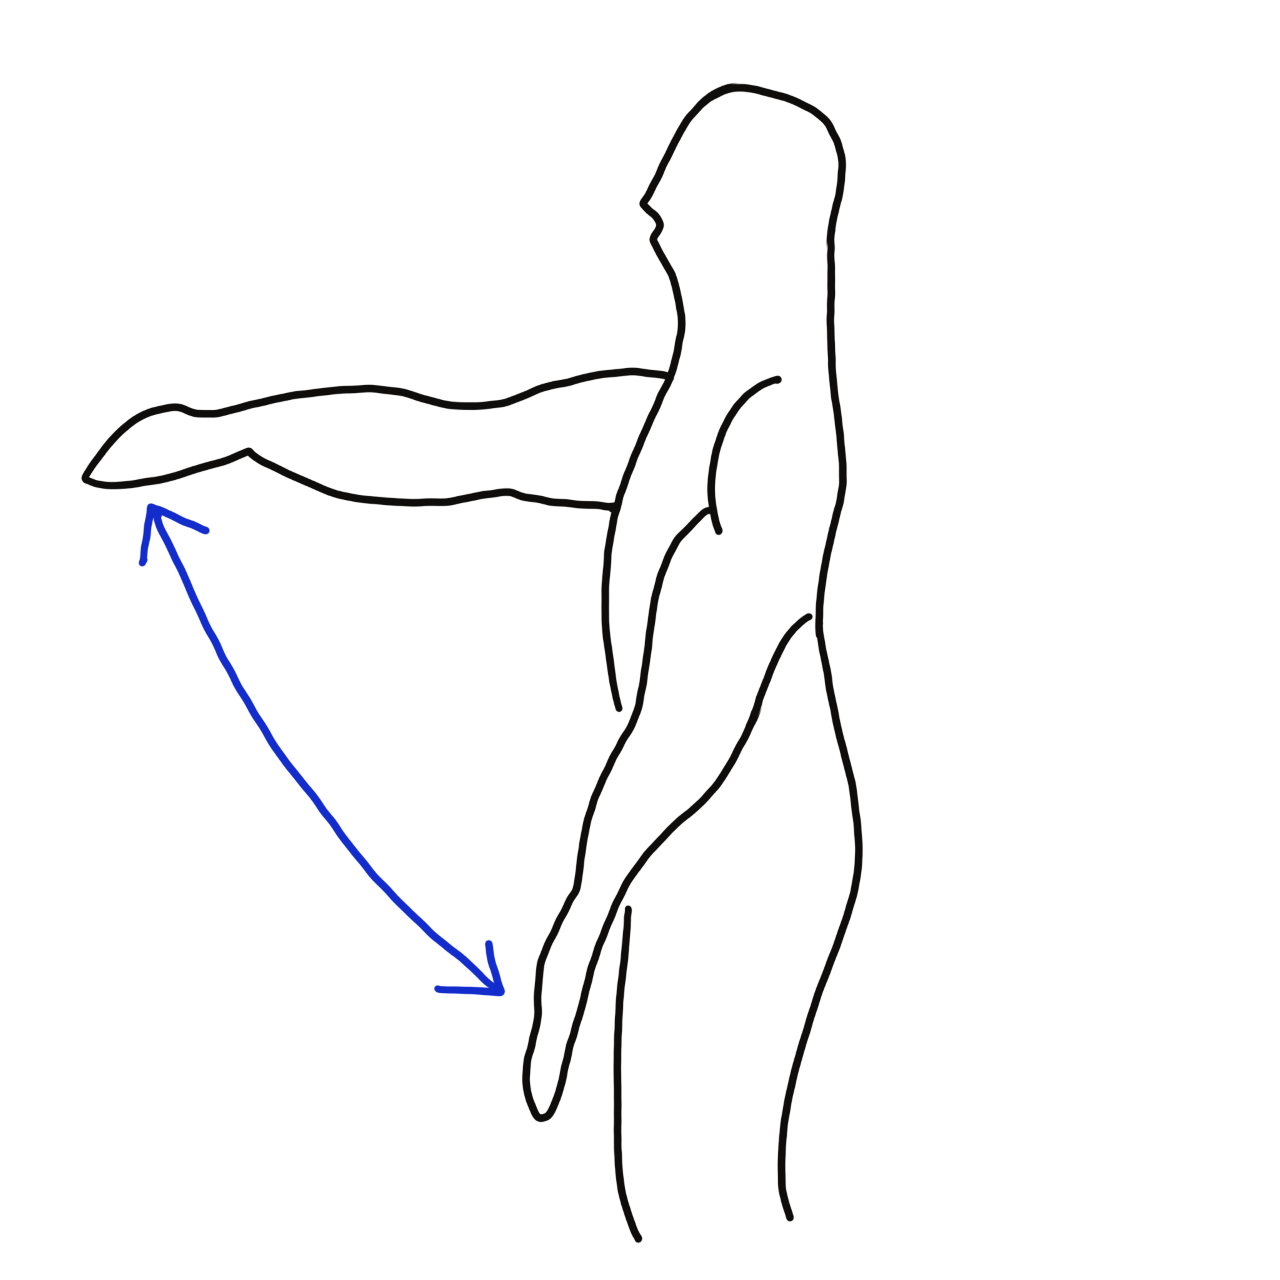 How to do a correct front raise with form